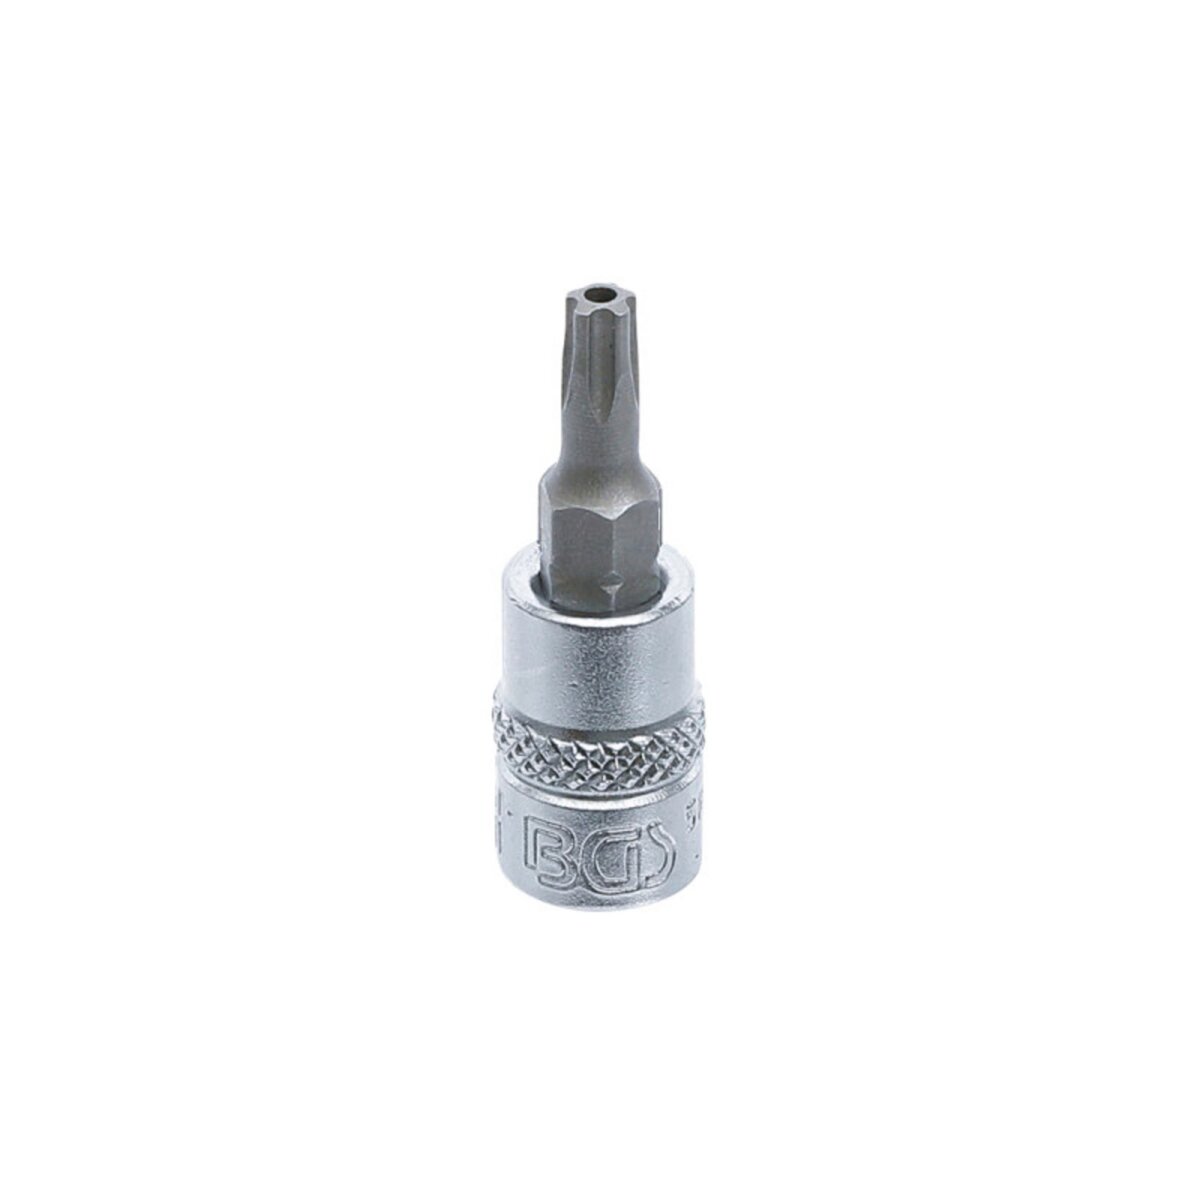  Douille a embout BGS TECHNIC - 6,3 mm - Torx Plus TS25 - 5184-TS25